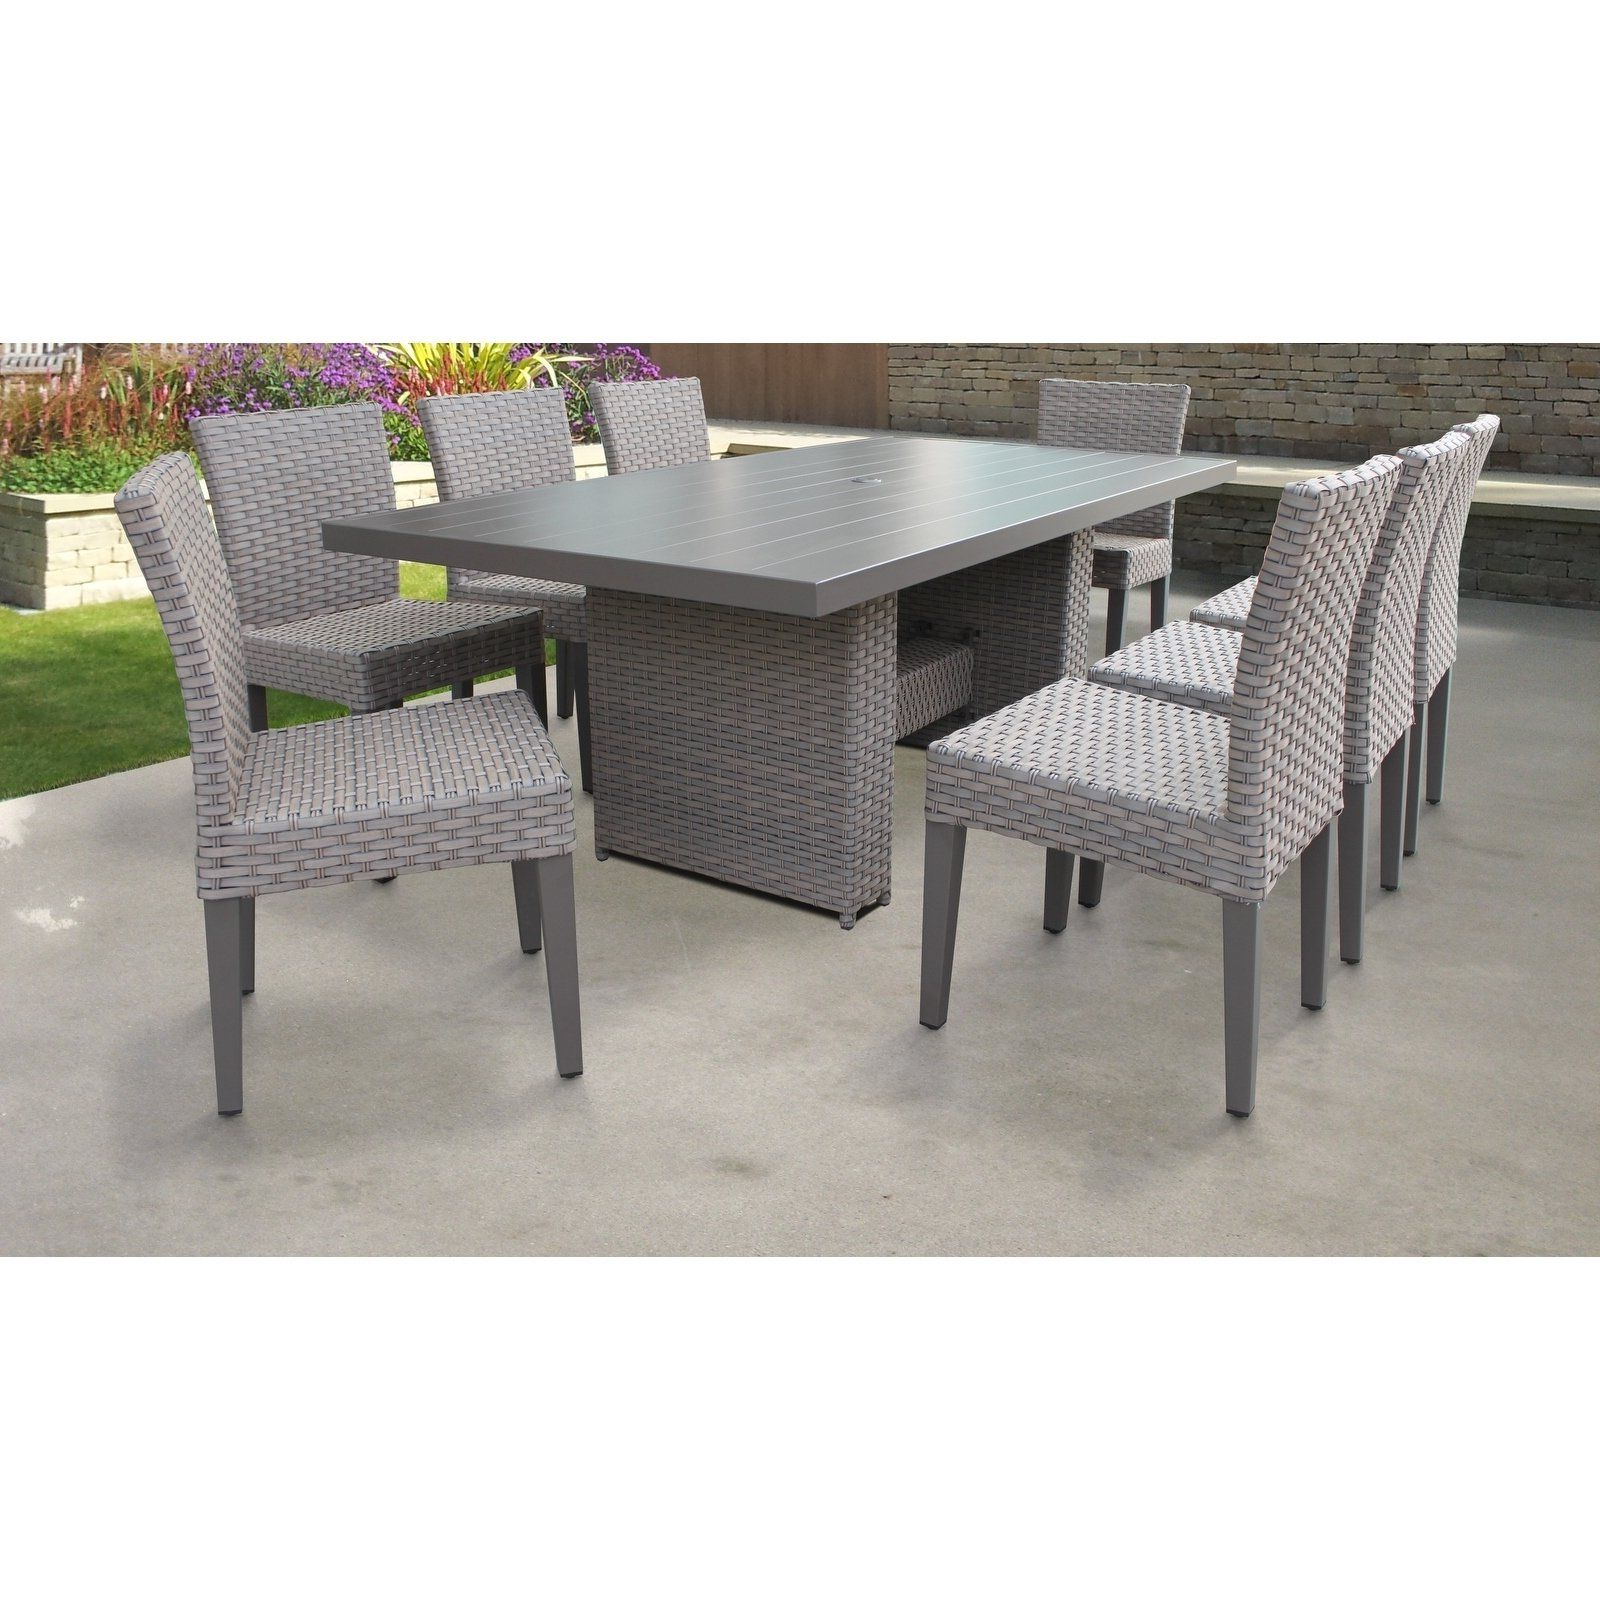 Armless Round Dining Sets Intended For Best And Newest 9 Piece Monterey Rectangular Outdoor Patio Dining Table With 8 Armless (View 13 of 15)